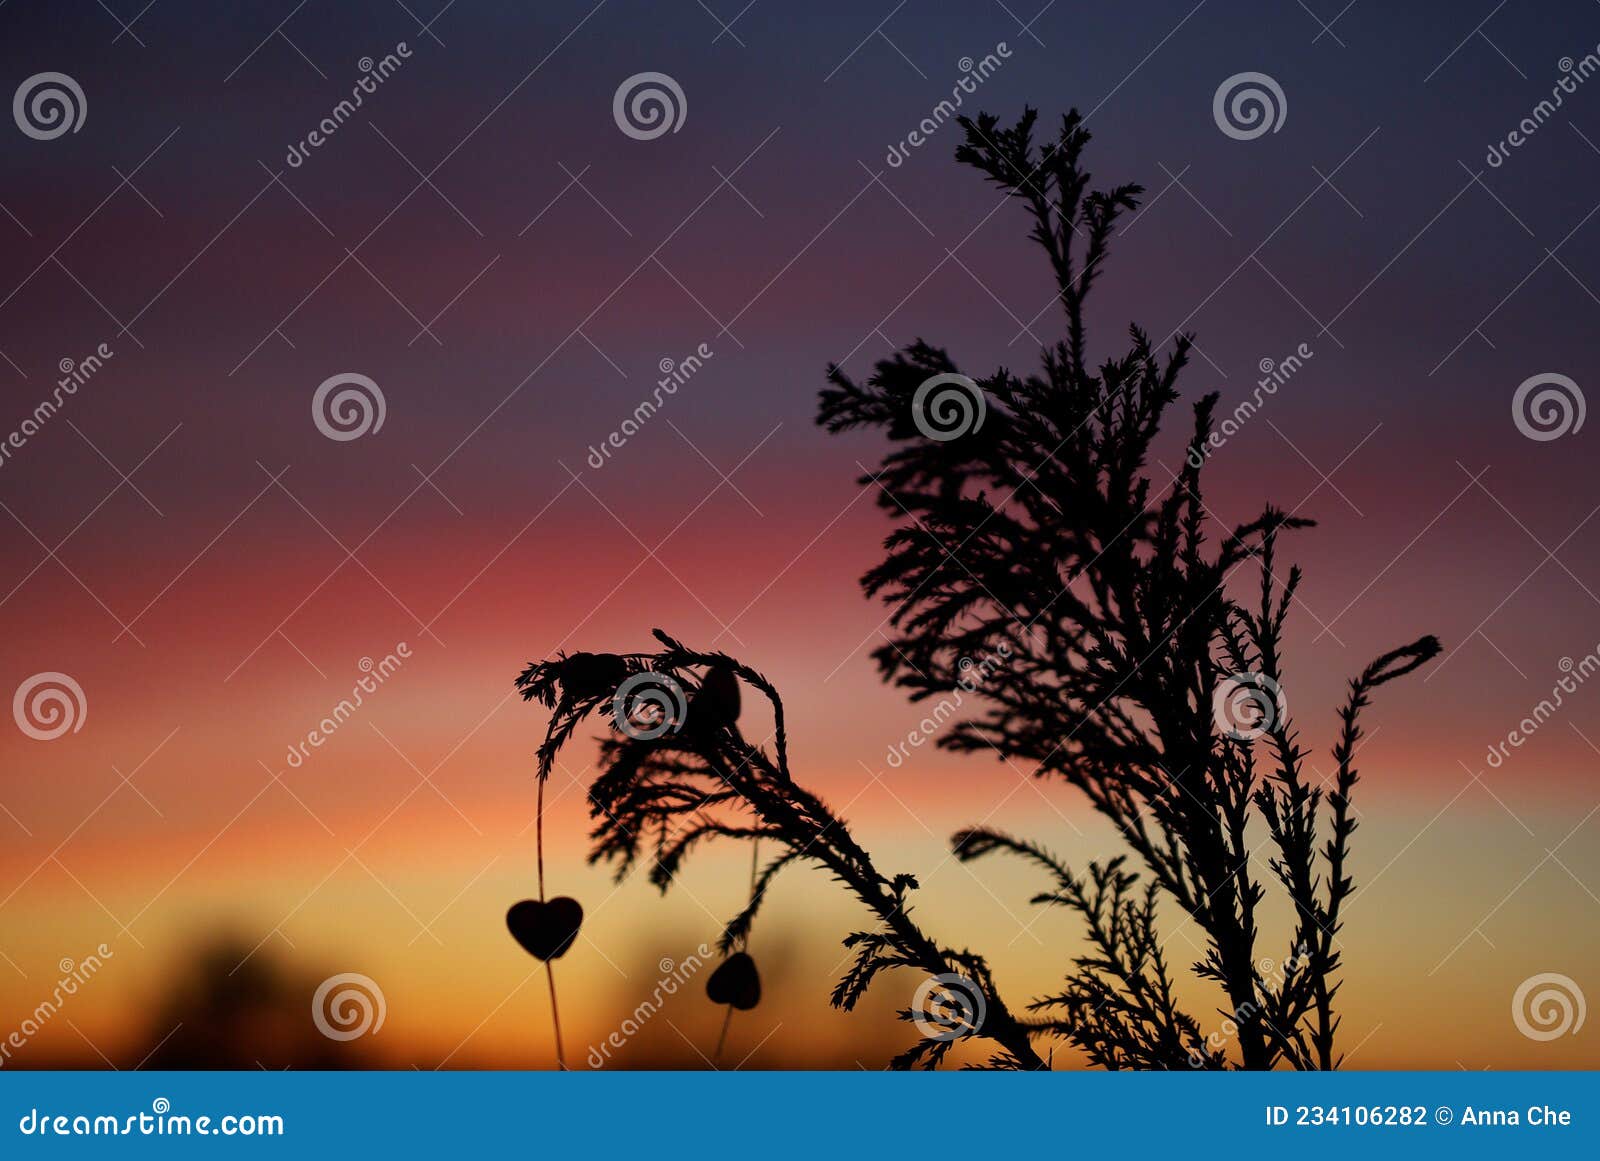 a dry branch silouete with colored sunset sky in background